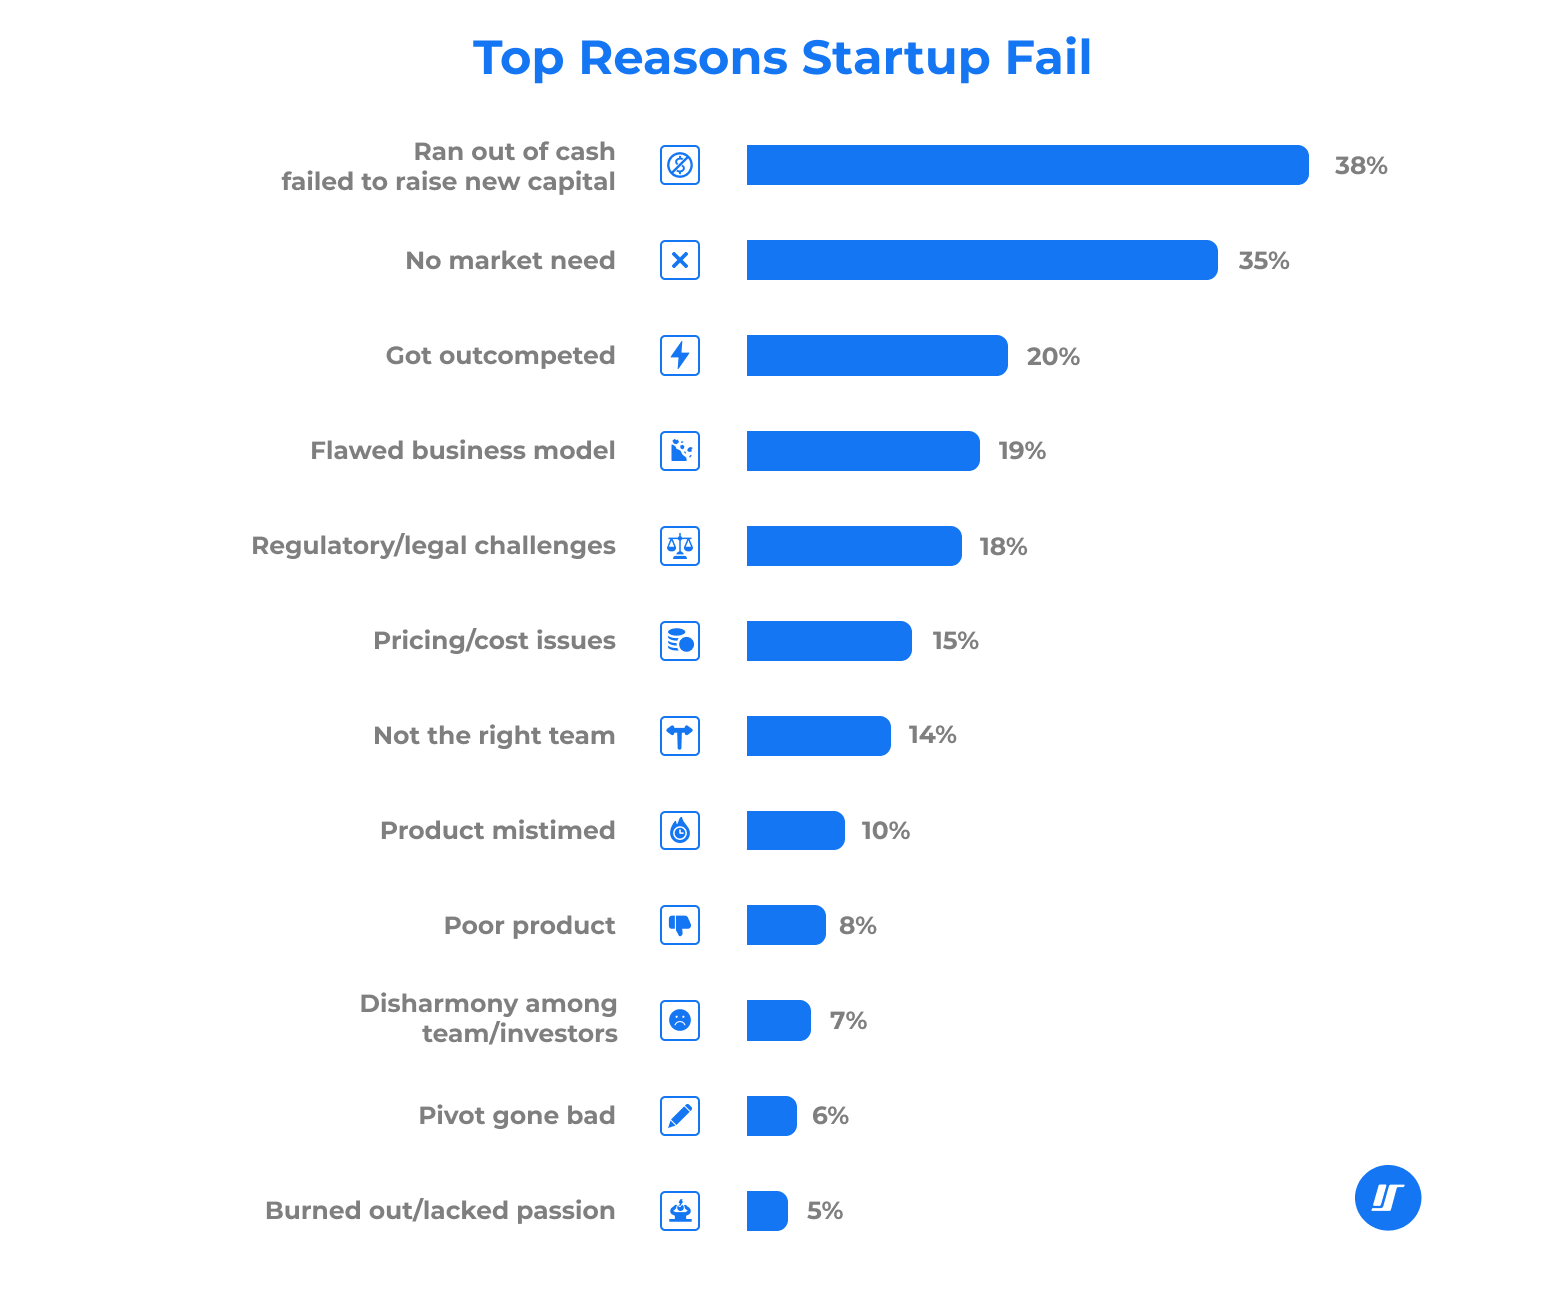 Infographic of the top reasons for startup failure